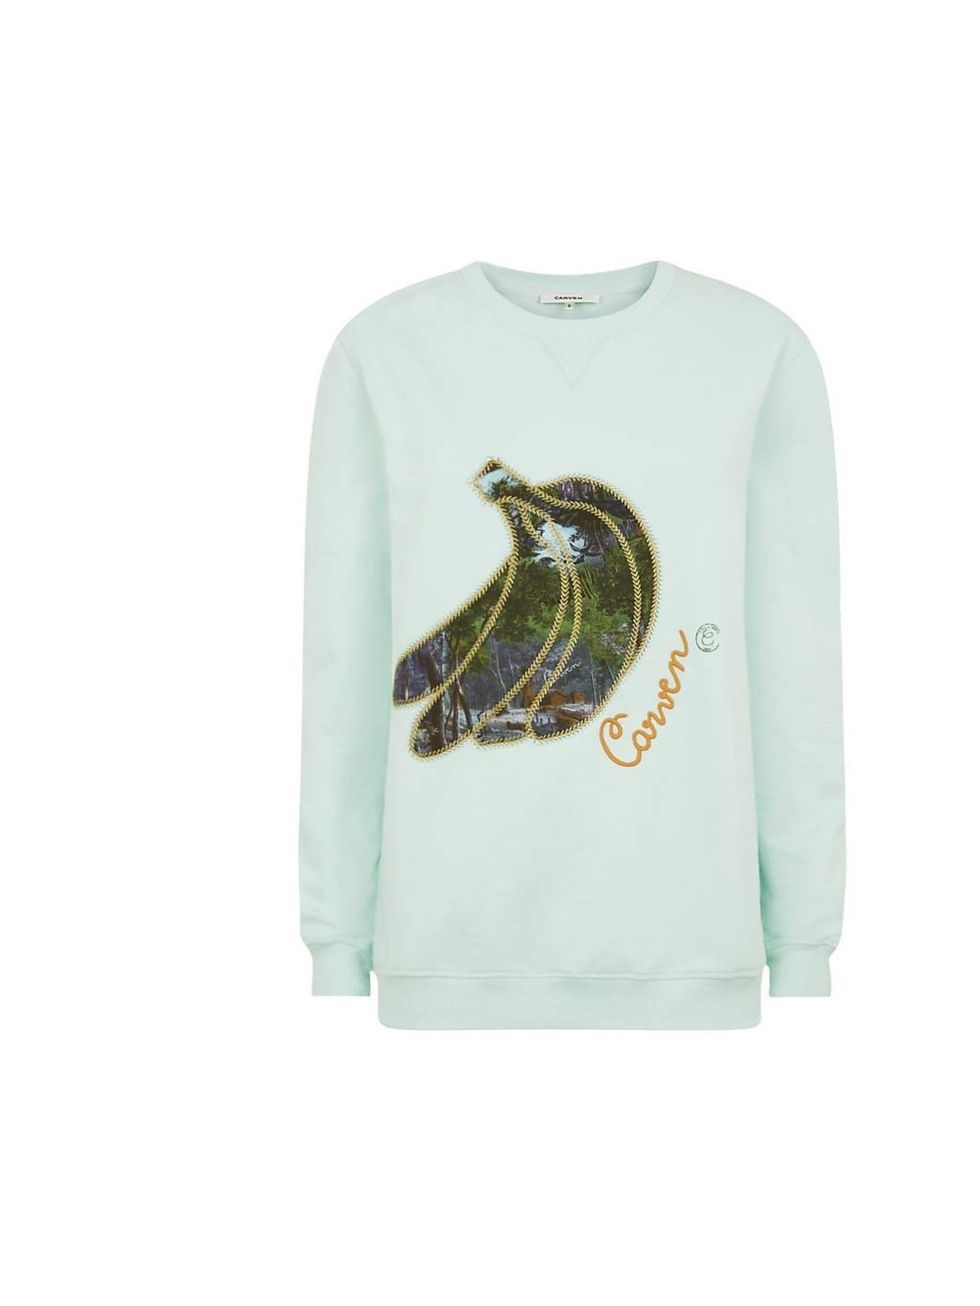 <p>Go bananas for this off-beat knit.</p><p>Carven sweatshirt, £180 at <a href="http://www.harrods.com/product/banana-sweater/carven/000000000003574402">Harrods.com</a></p>